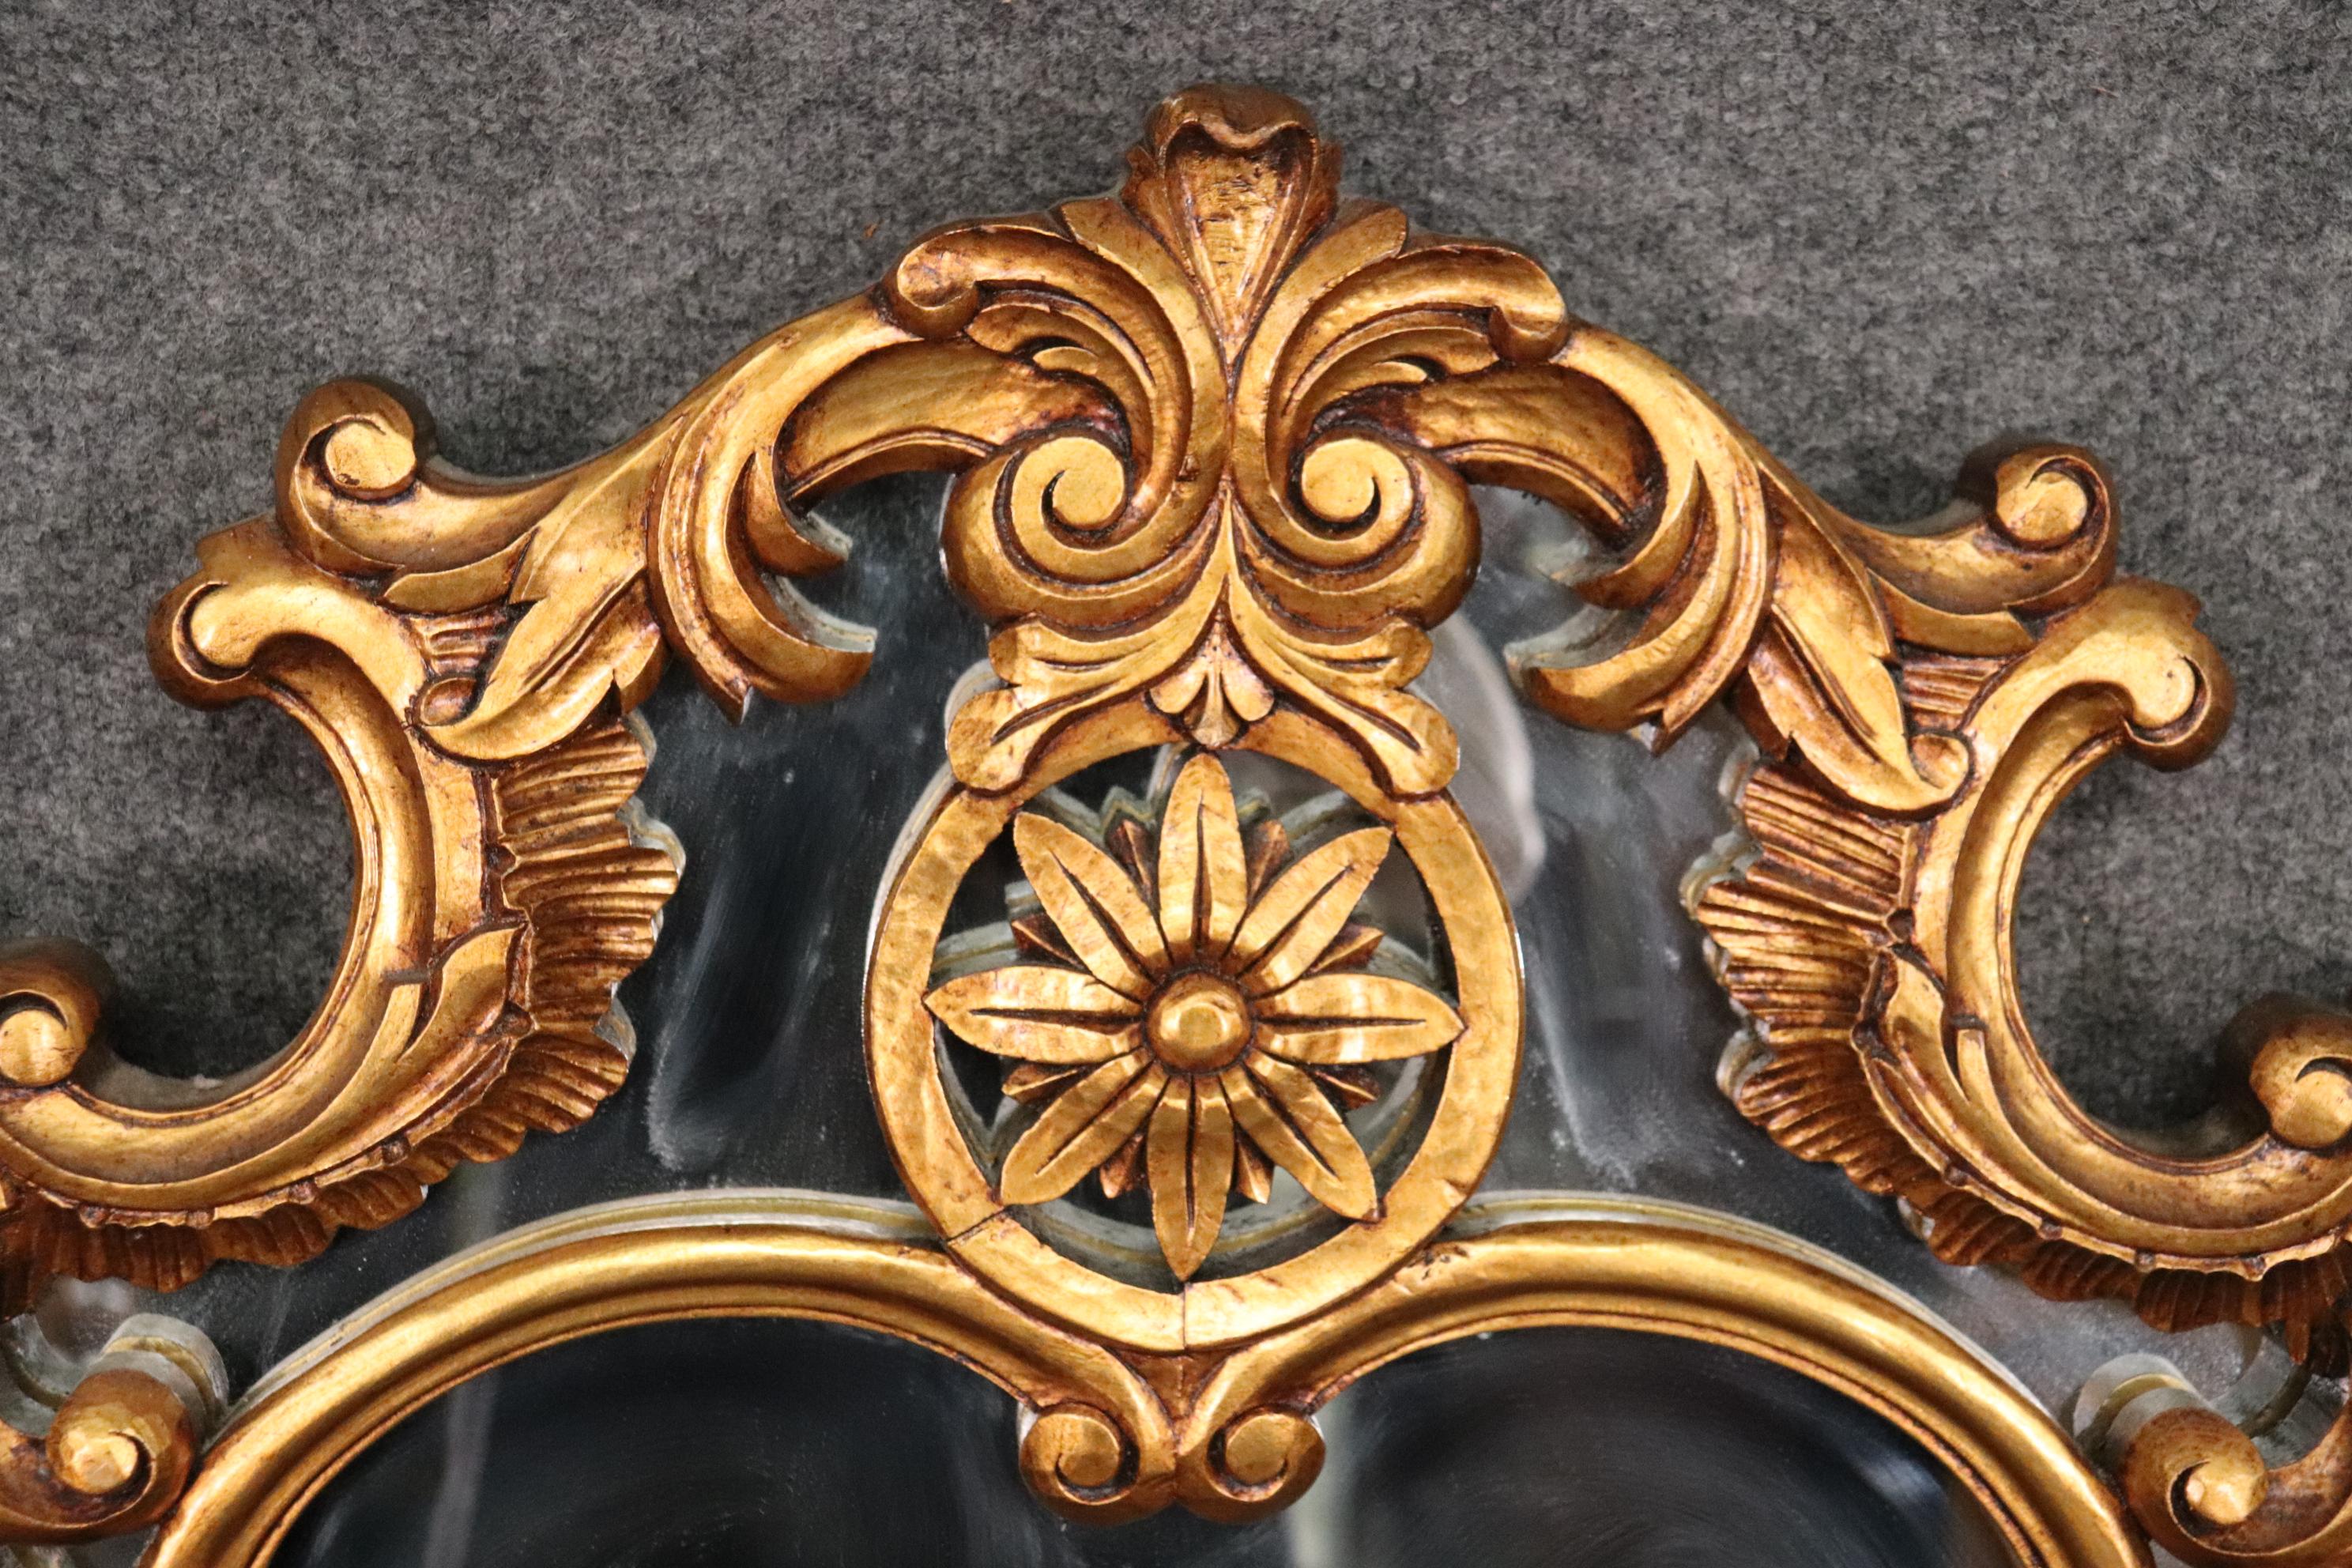 This is a gorgeous carved gilded mirror. The mirror is in good condition. The mirror measures 55 tall x 40 wide x 2 deep.